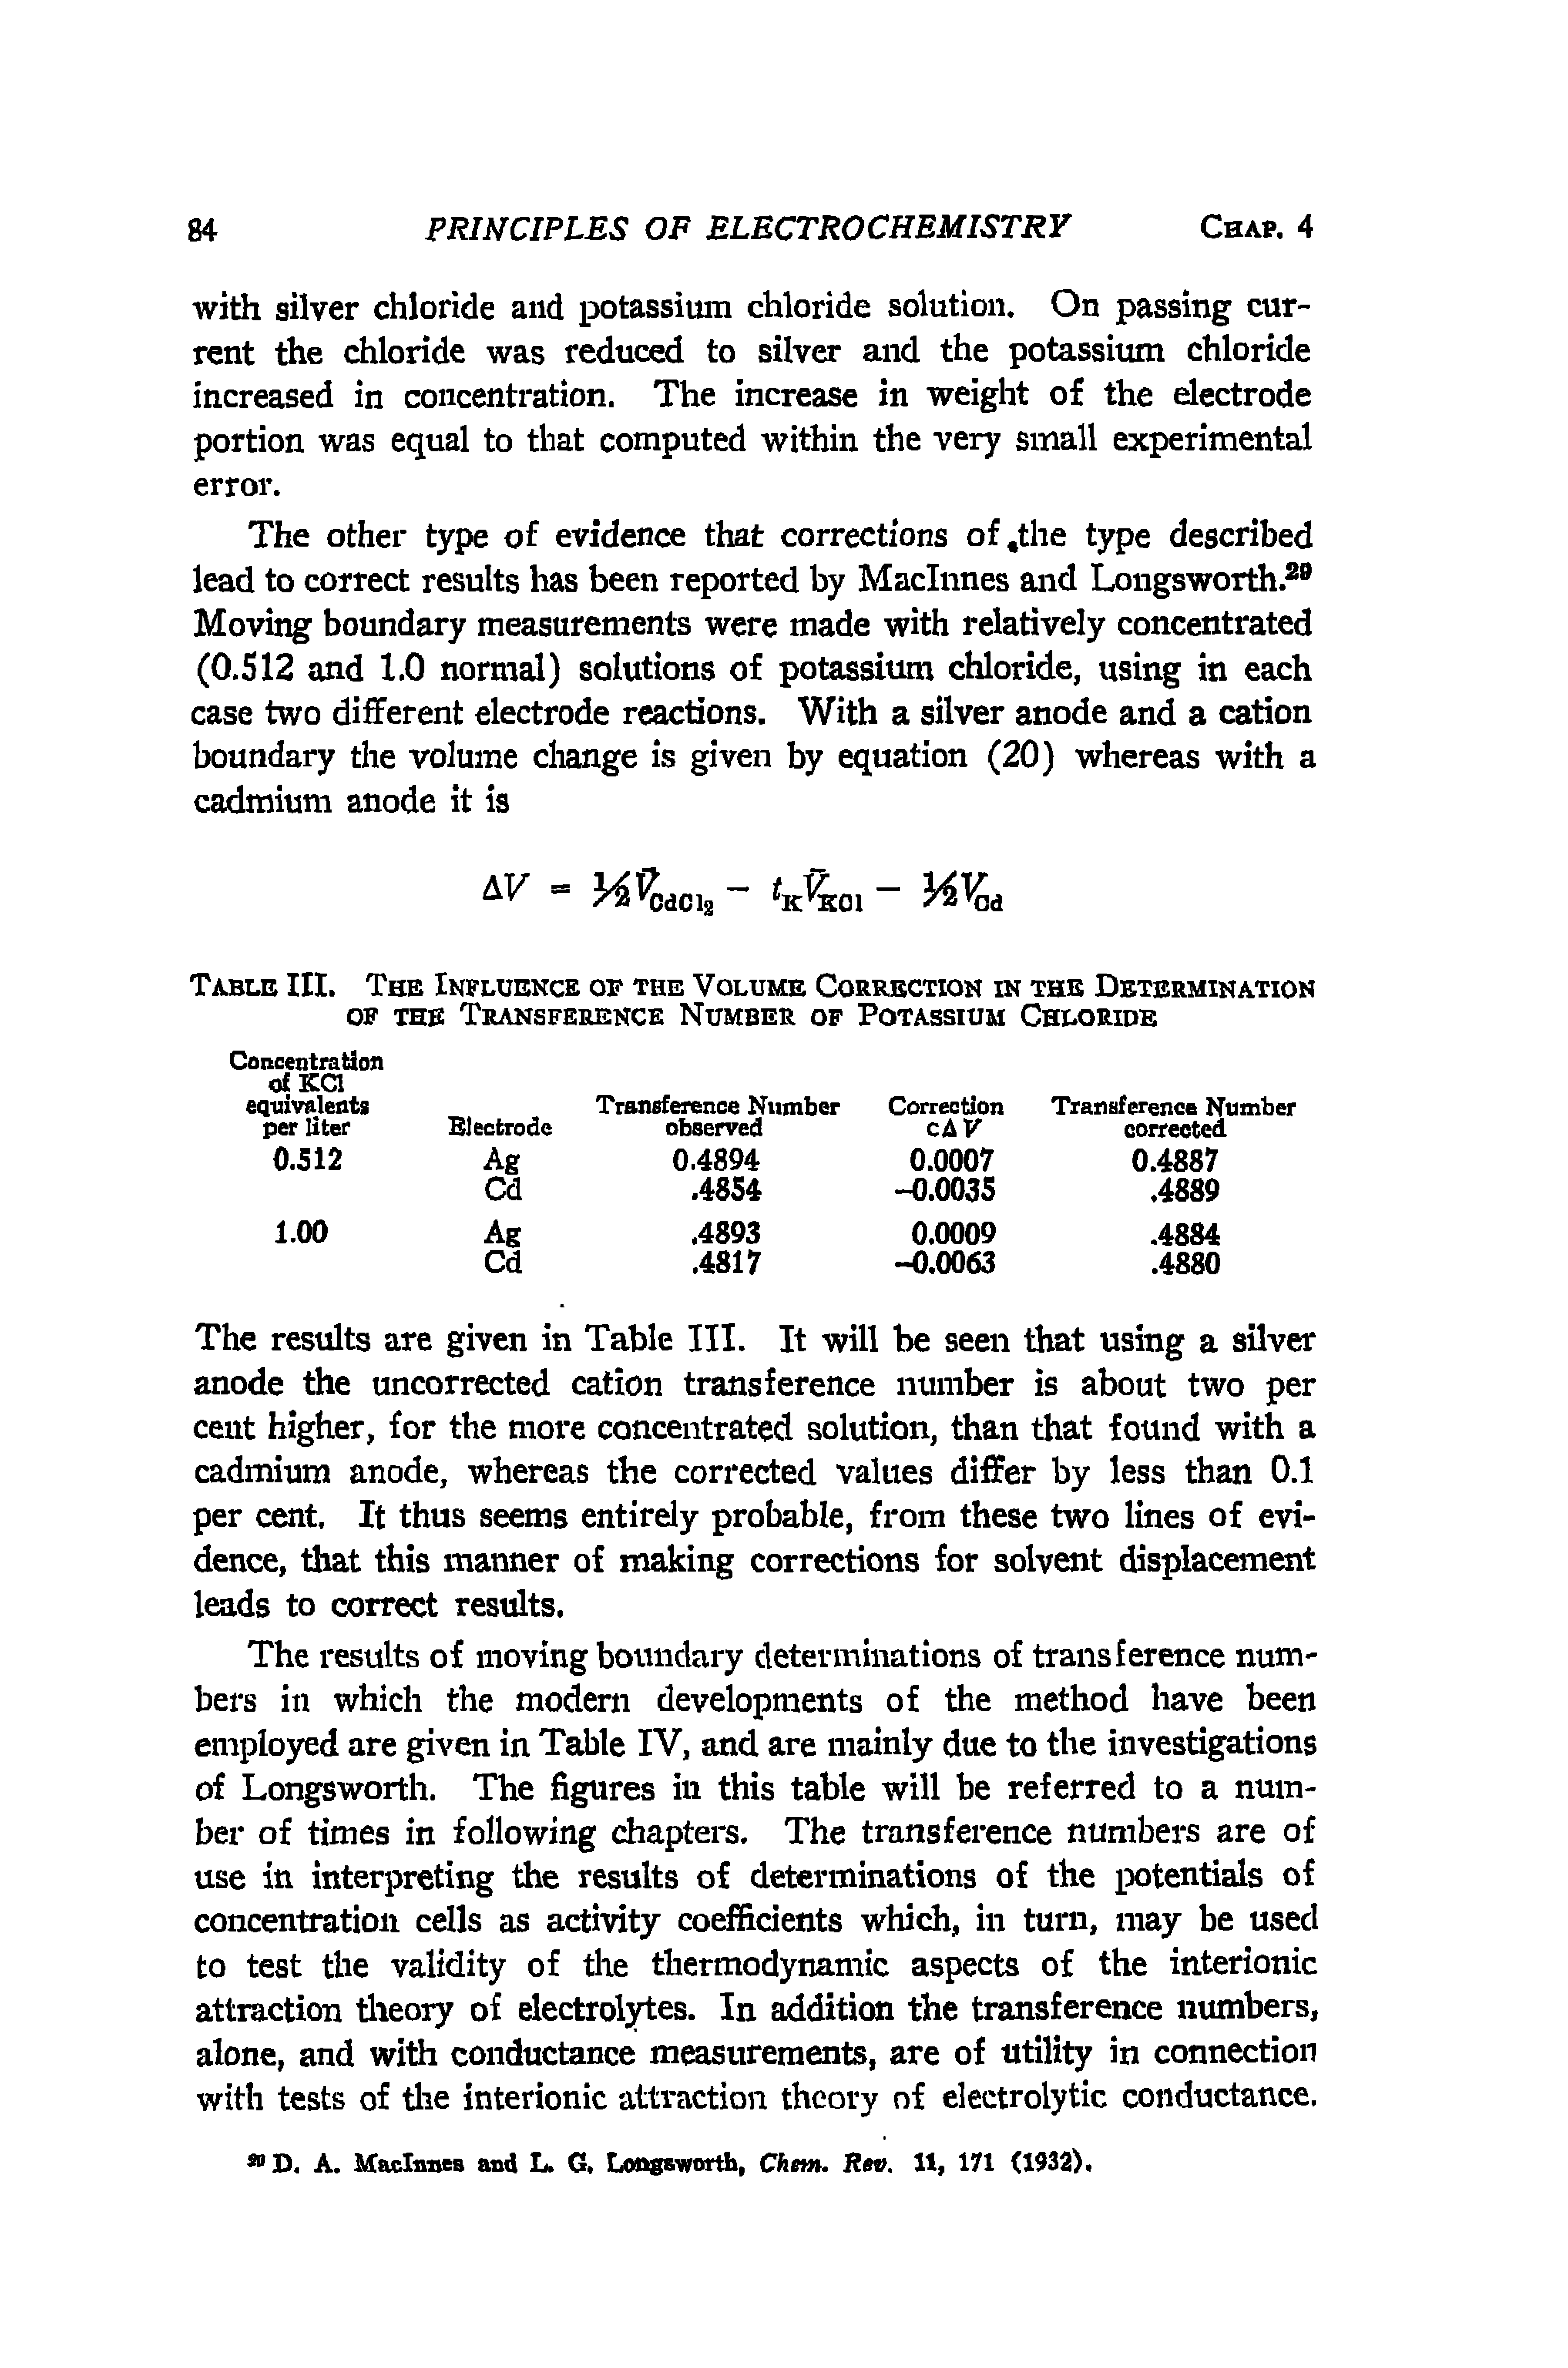 Table III. The Influence of the Volume Correction in the Determination of the Transference Number of Potassium Chloride...